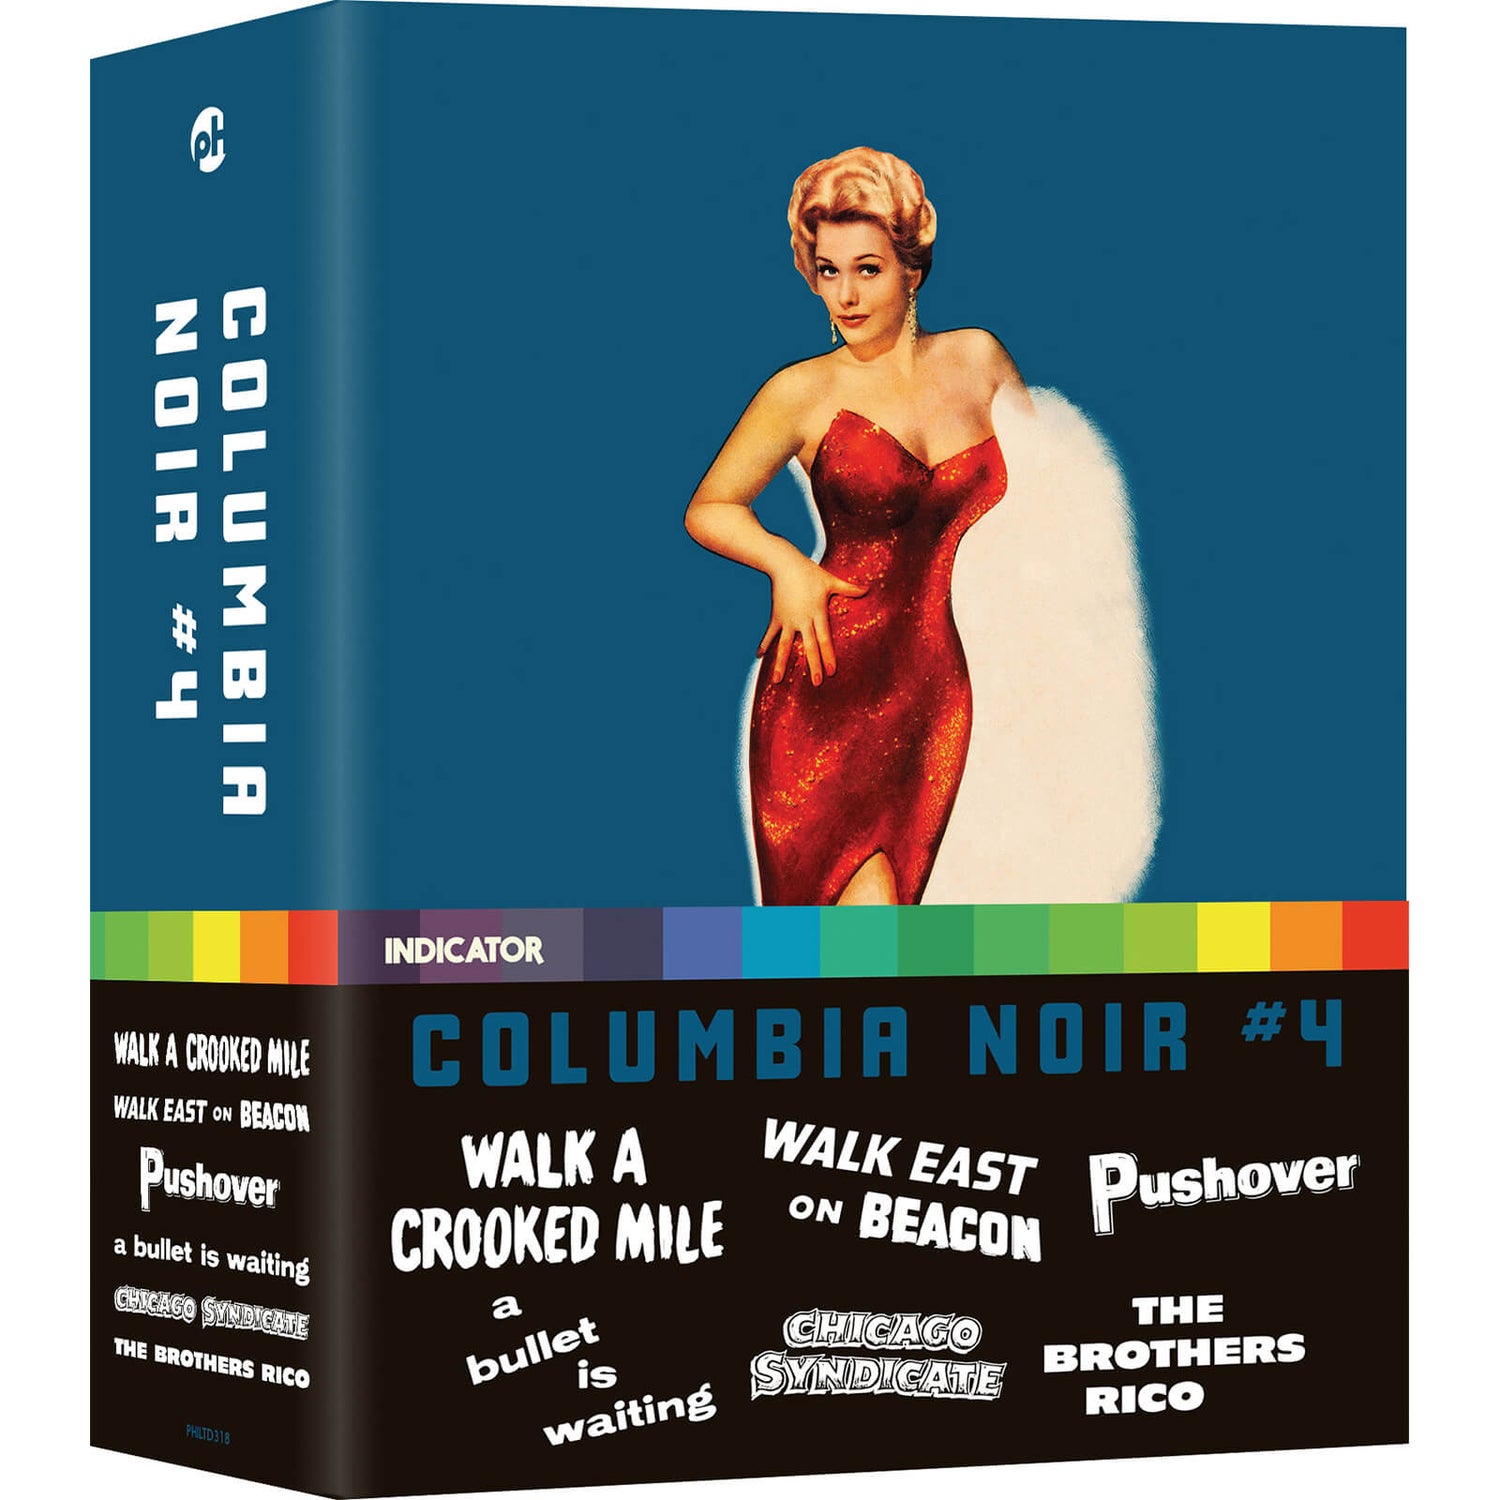 Columbia Noir #4 - Limited Edition